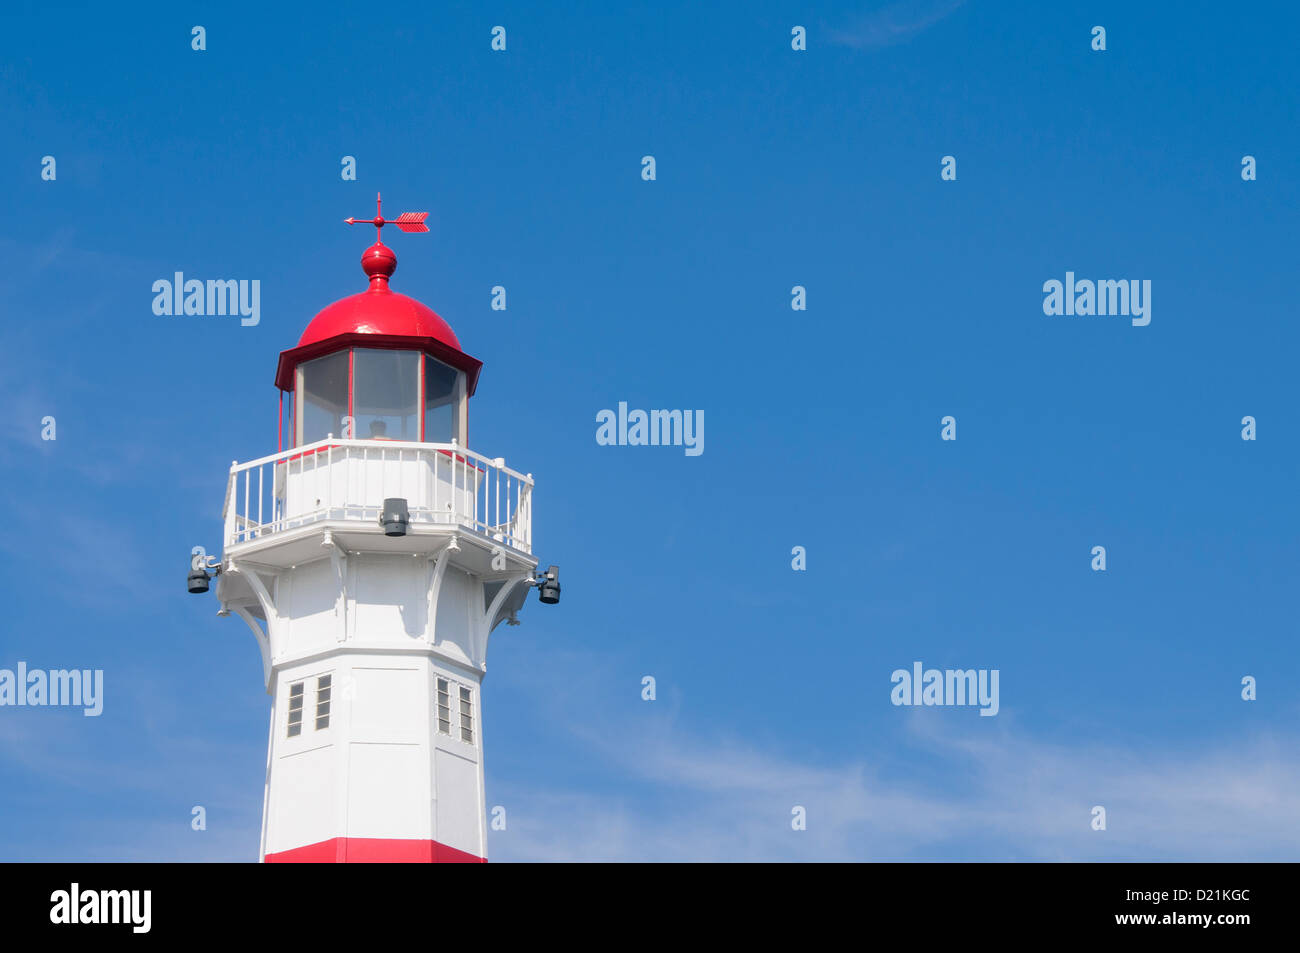 A red and white lighthouse in the harbor of Malmo, Sweden Stock Photo